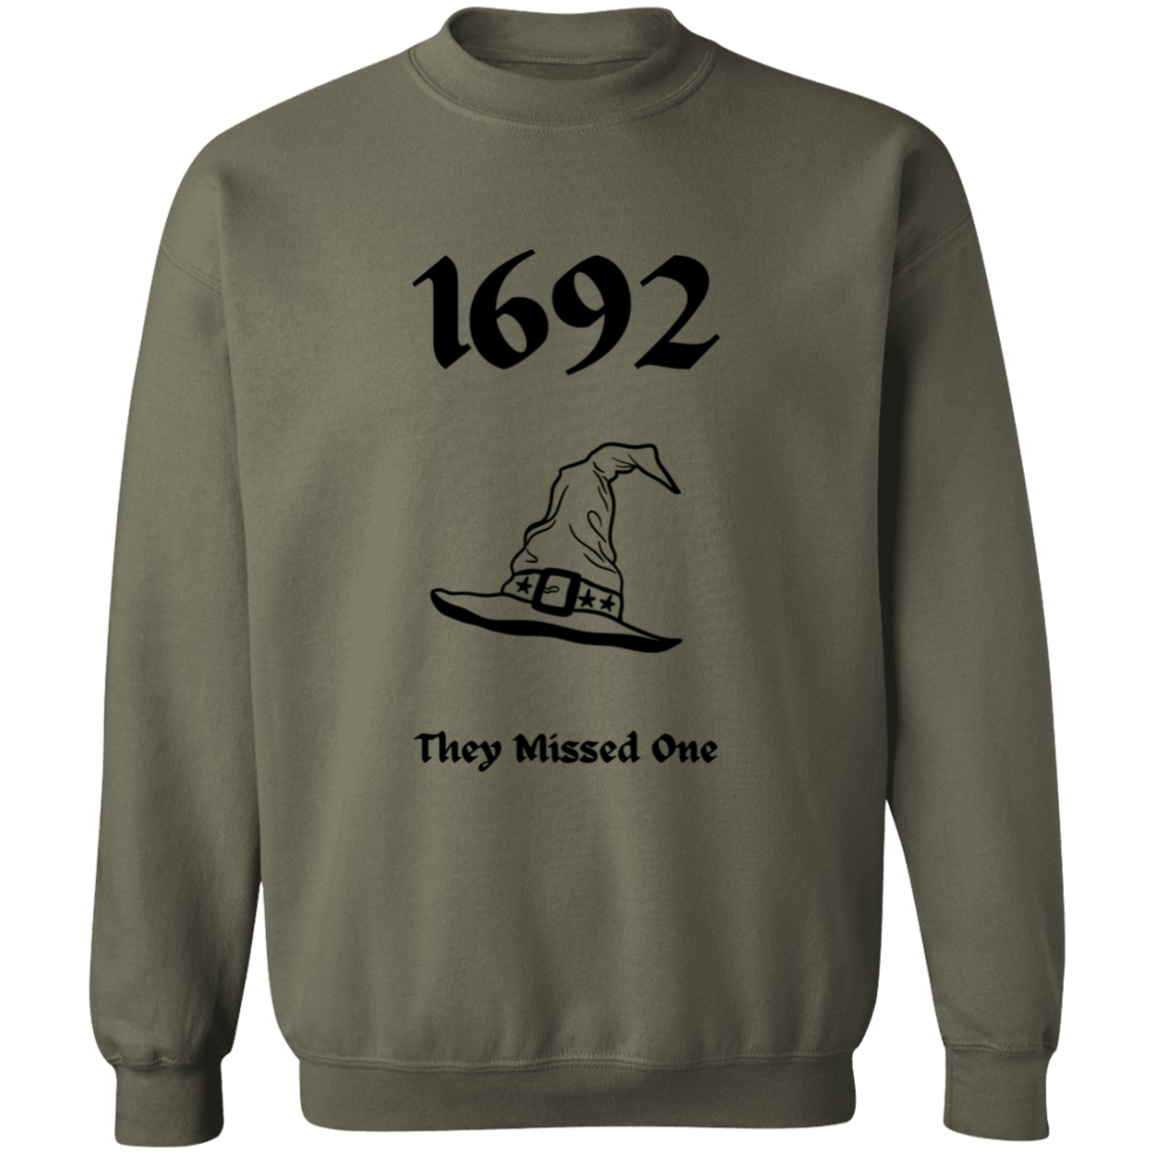 Get trendy with 1692 Crewneck Pullover Sweatshirt - Sweatshirts available at Good Gift Company. Grab yours for $39.95 today!